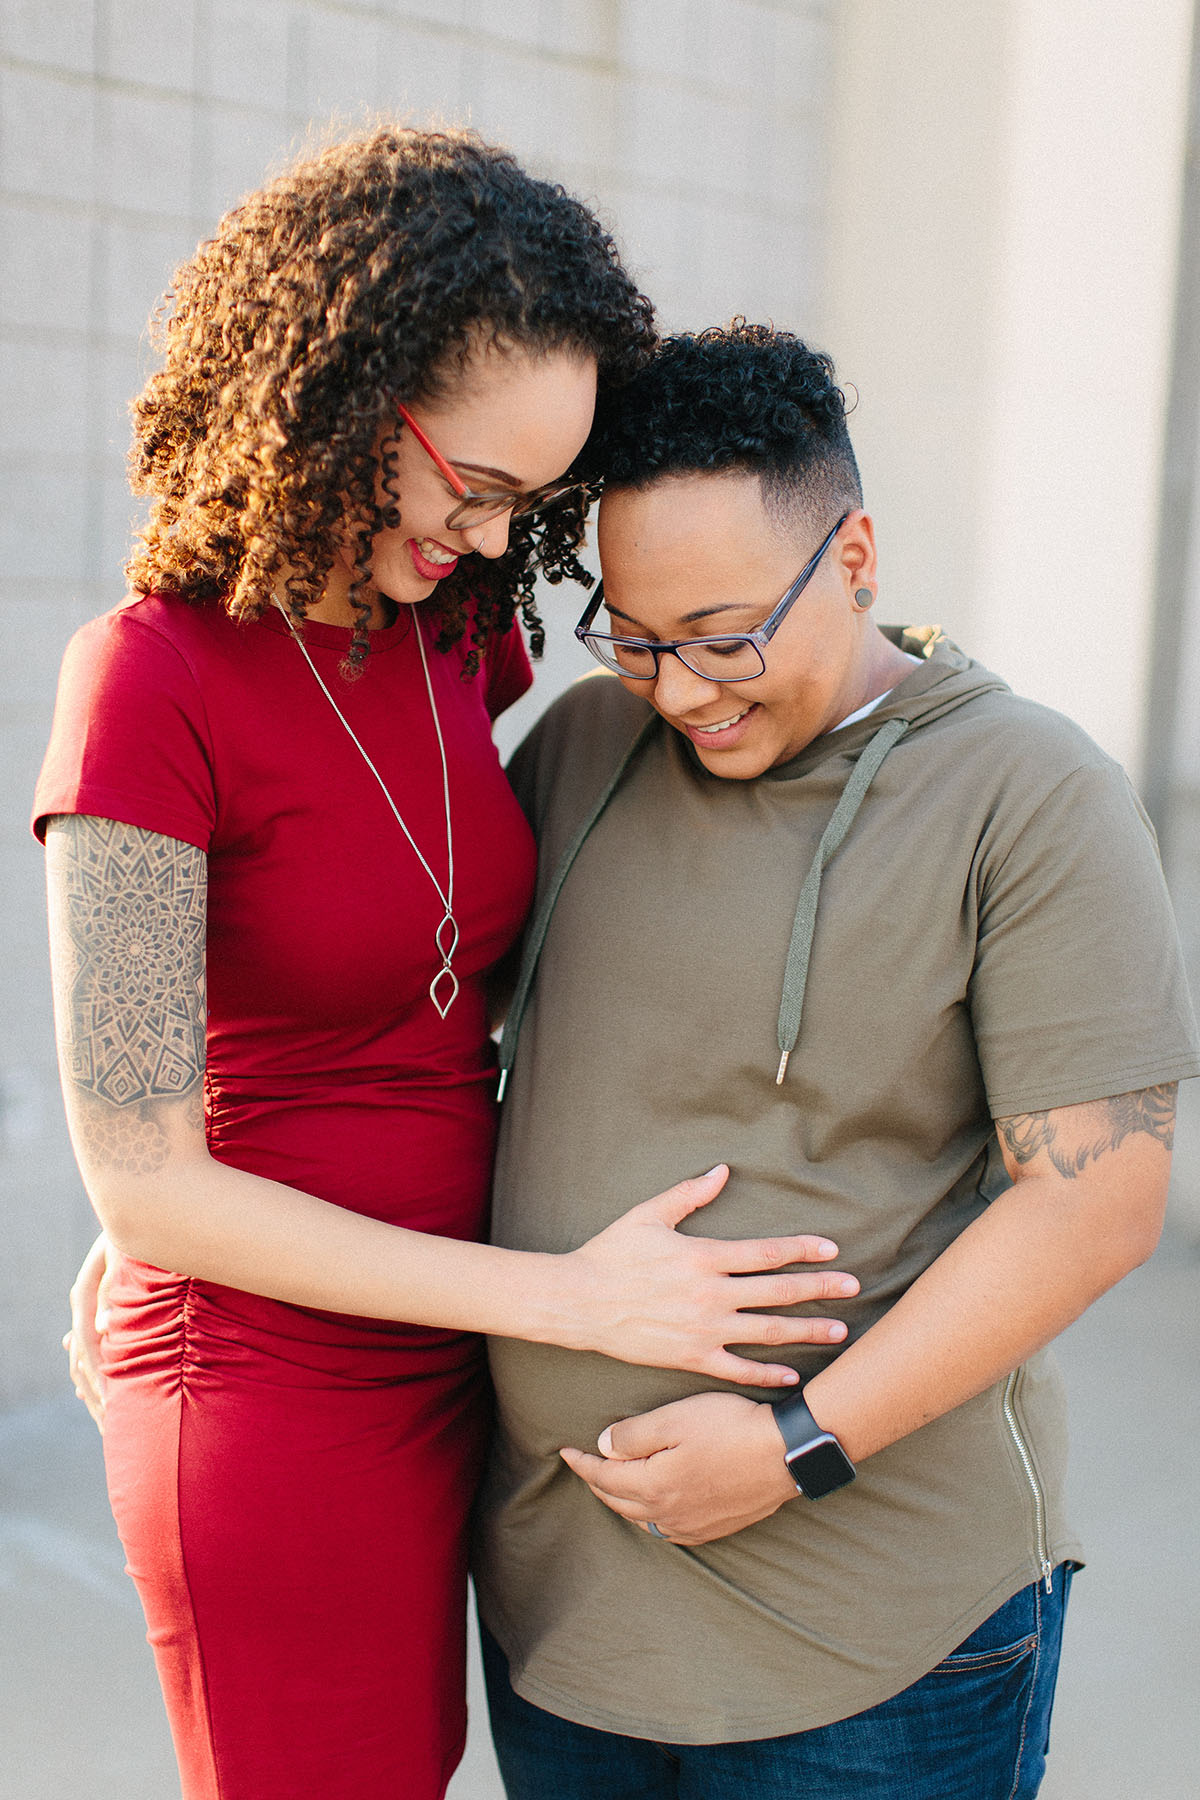 Sunset, books and basketball maternity photos LGBTQ+ family pregnancy new baby child two moms lesbian moms gay parents queer parenting